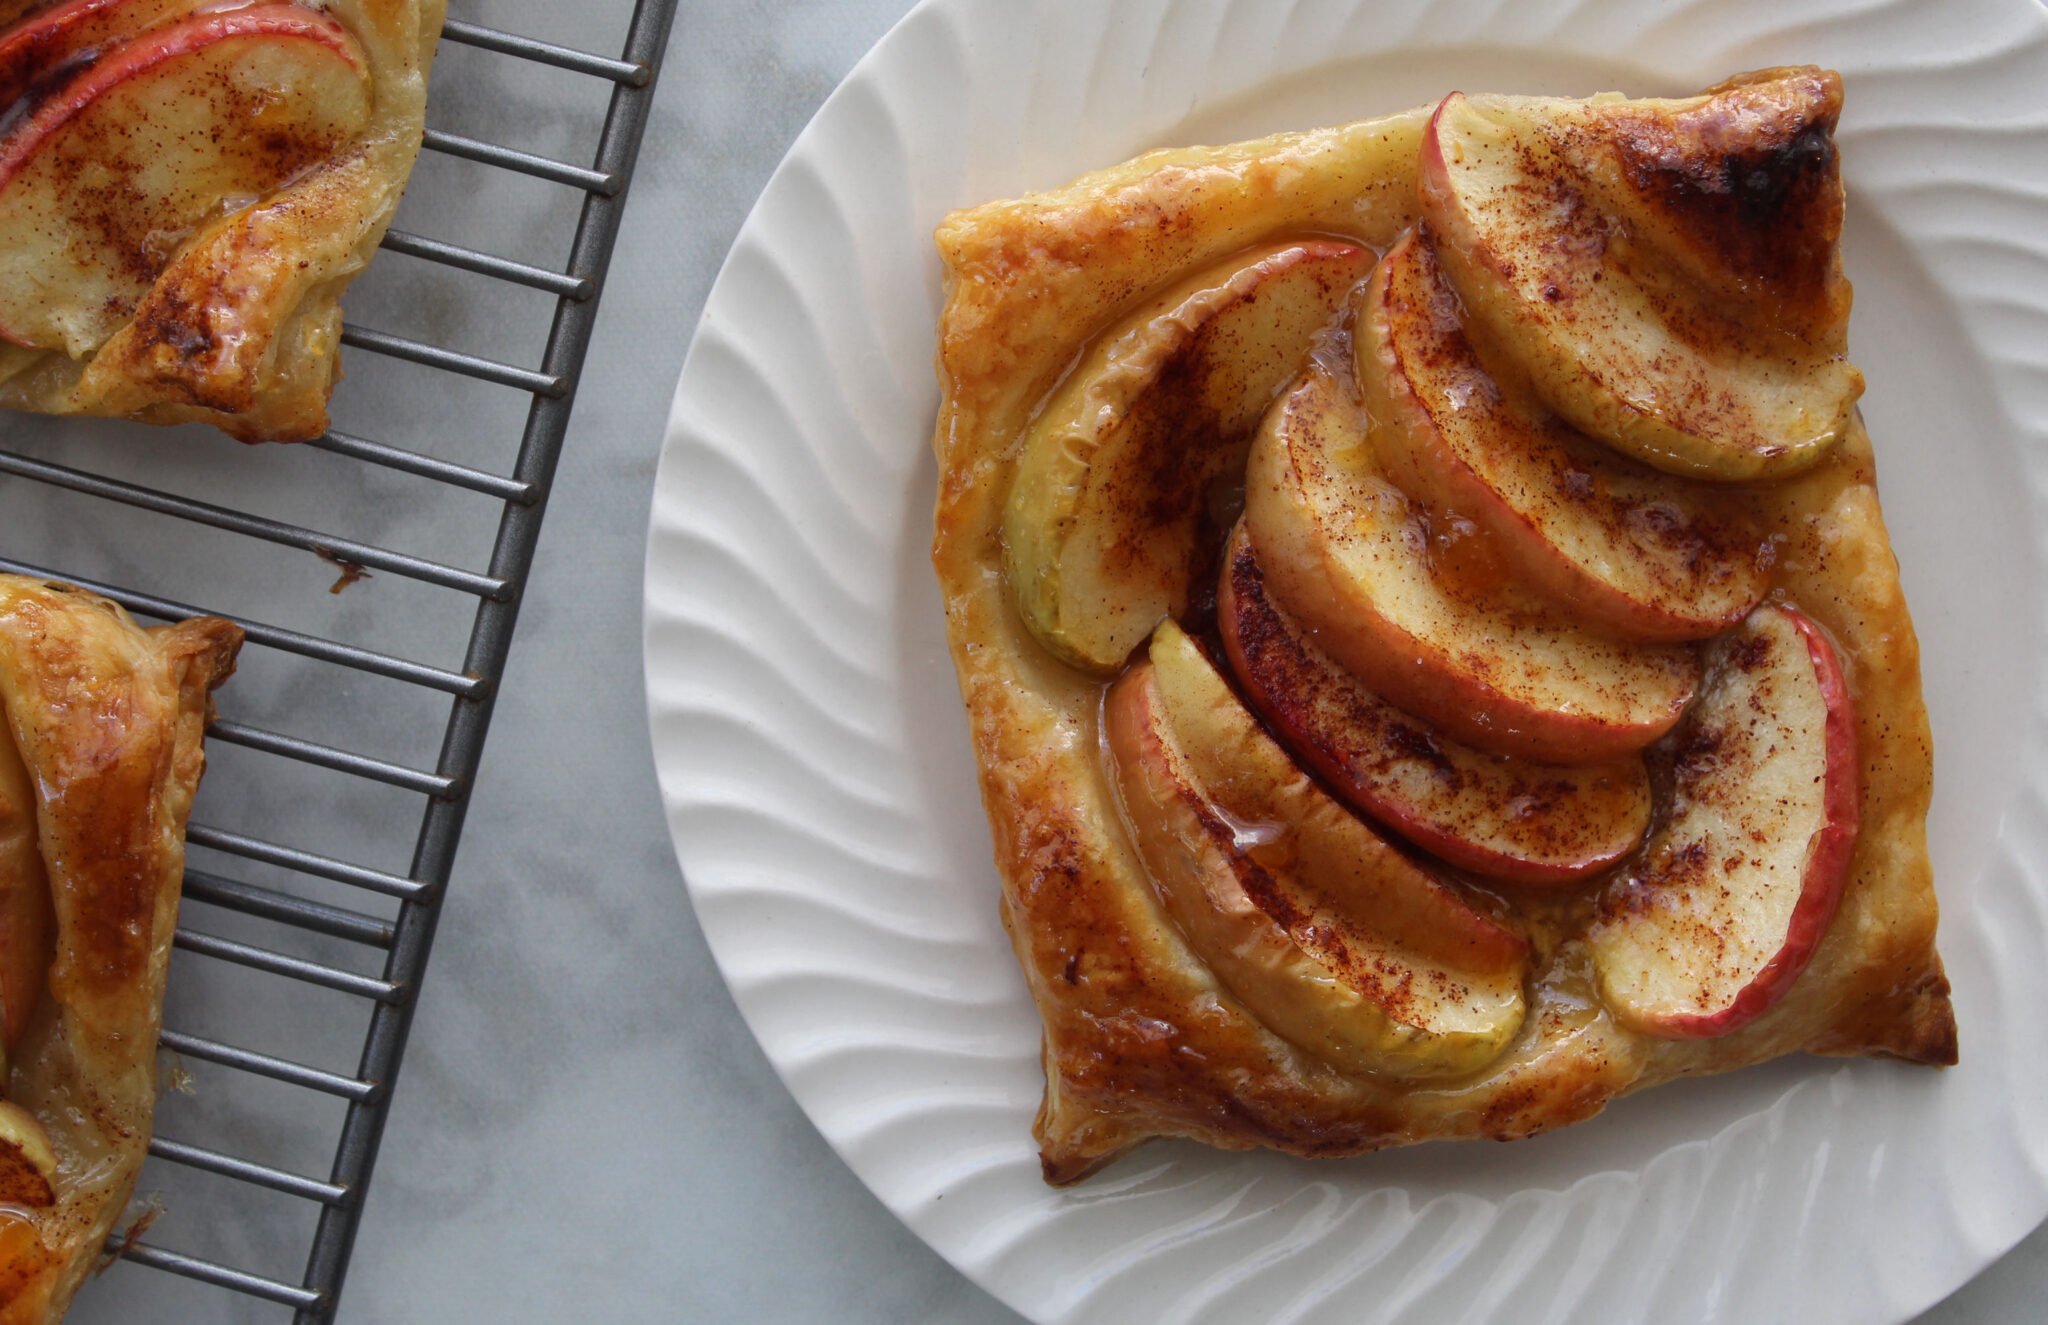 Puff pastry apple tart on a white plate.  Other apple tarts can be seen cooling to the side.